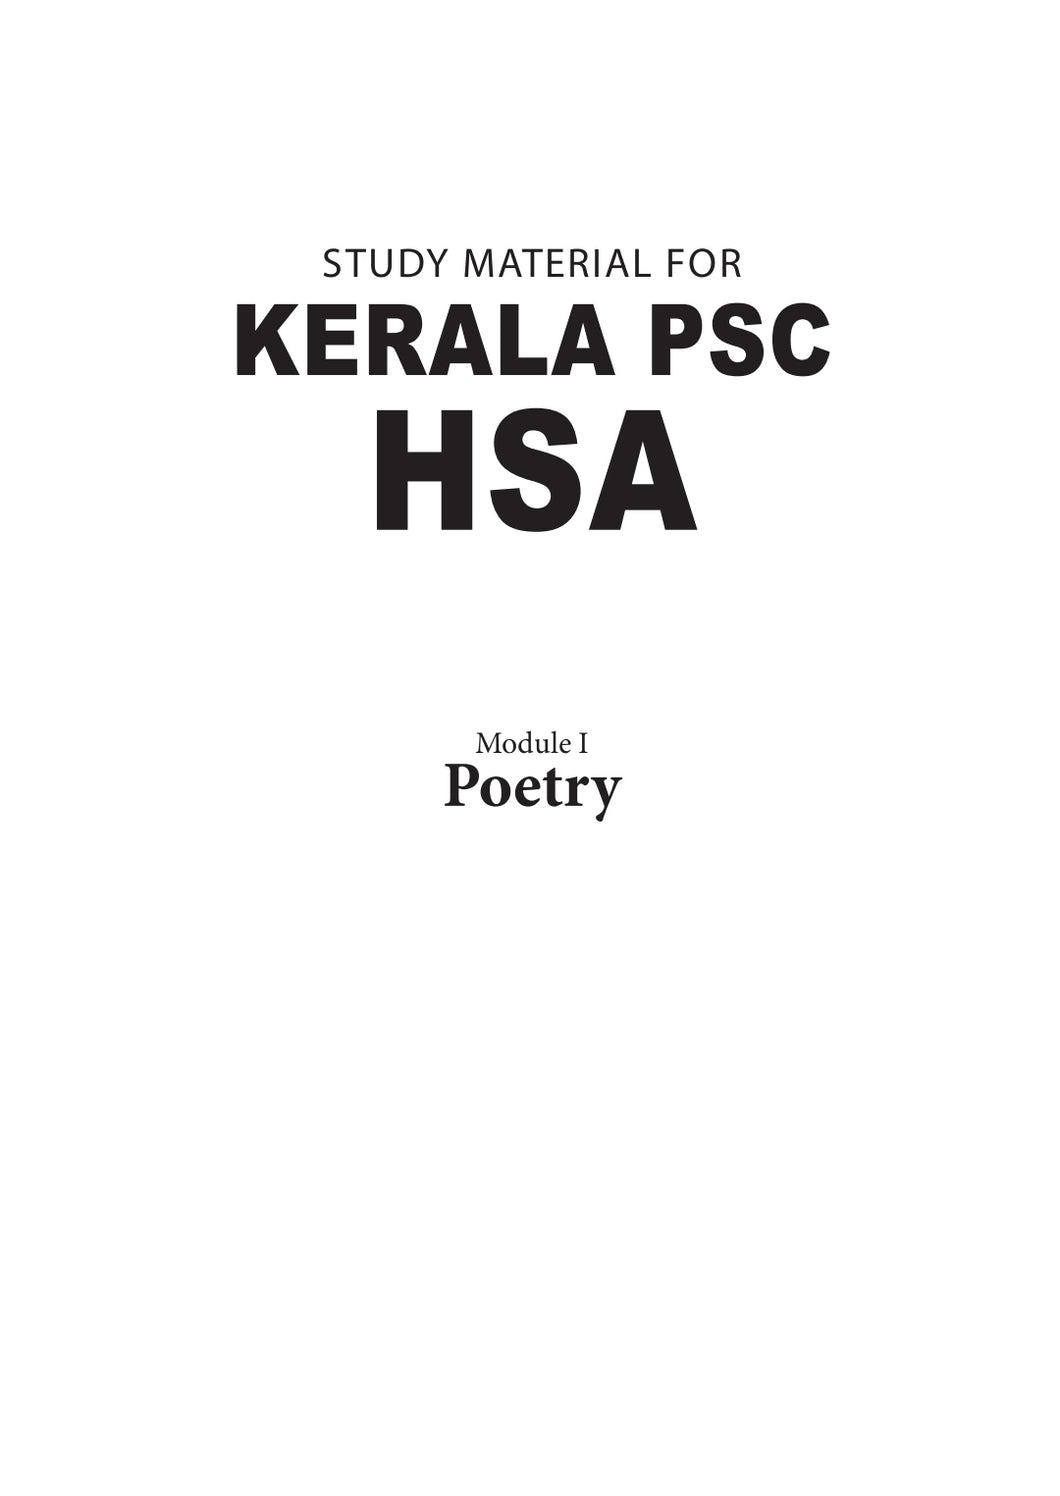 Study Material for Kerala PSC HSA Module 1: Poetry